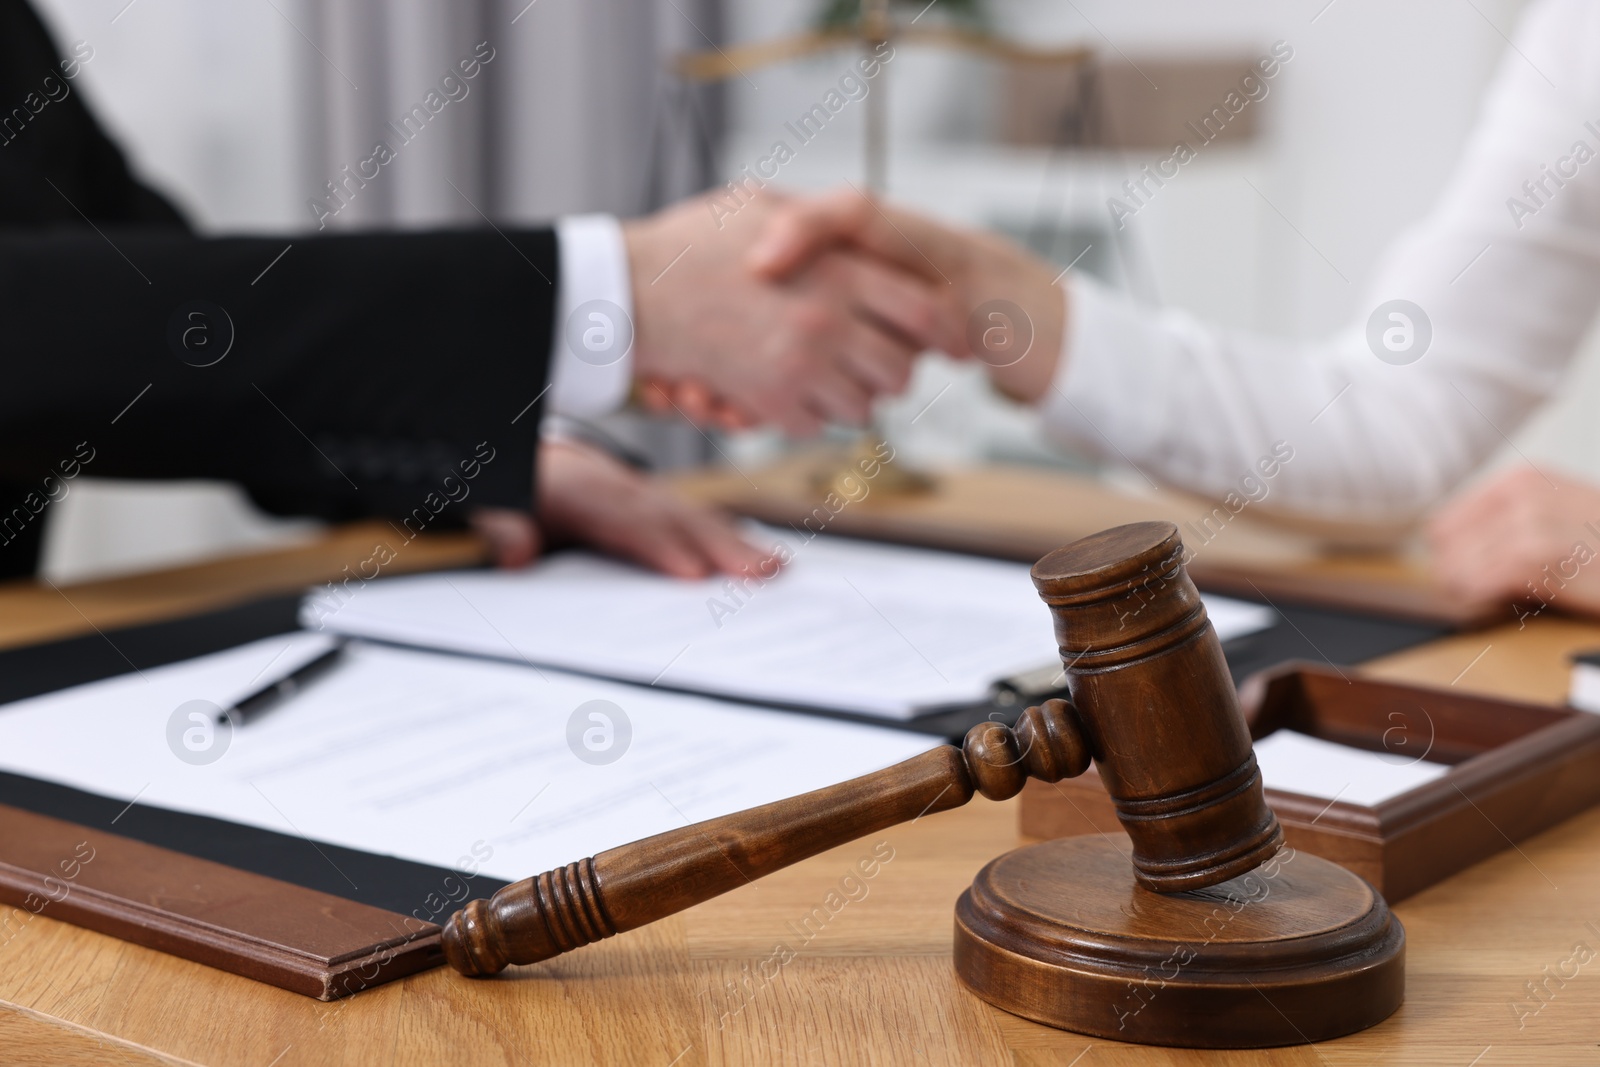 Photo of Lawyer shaking hands with client in office, focus on gavel